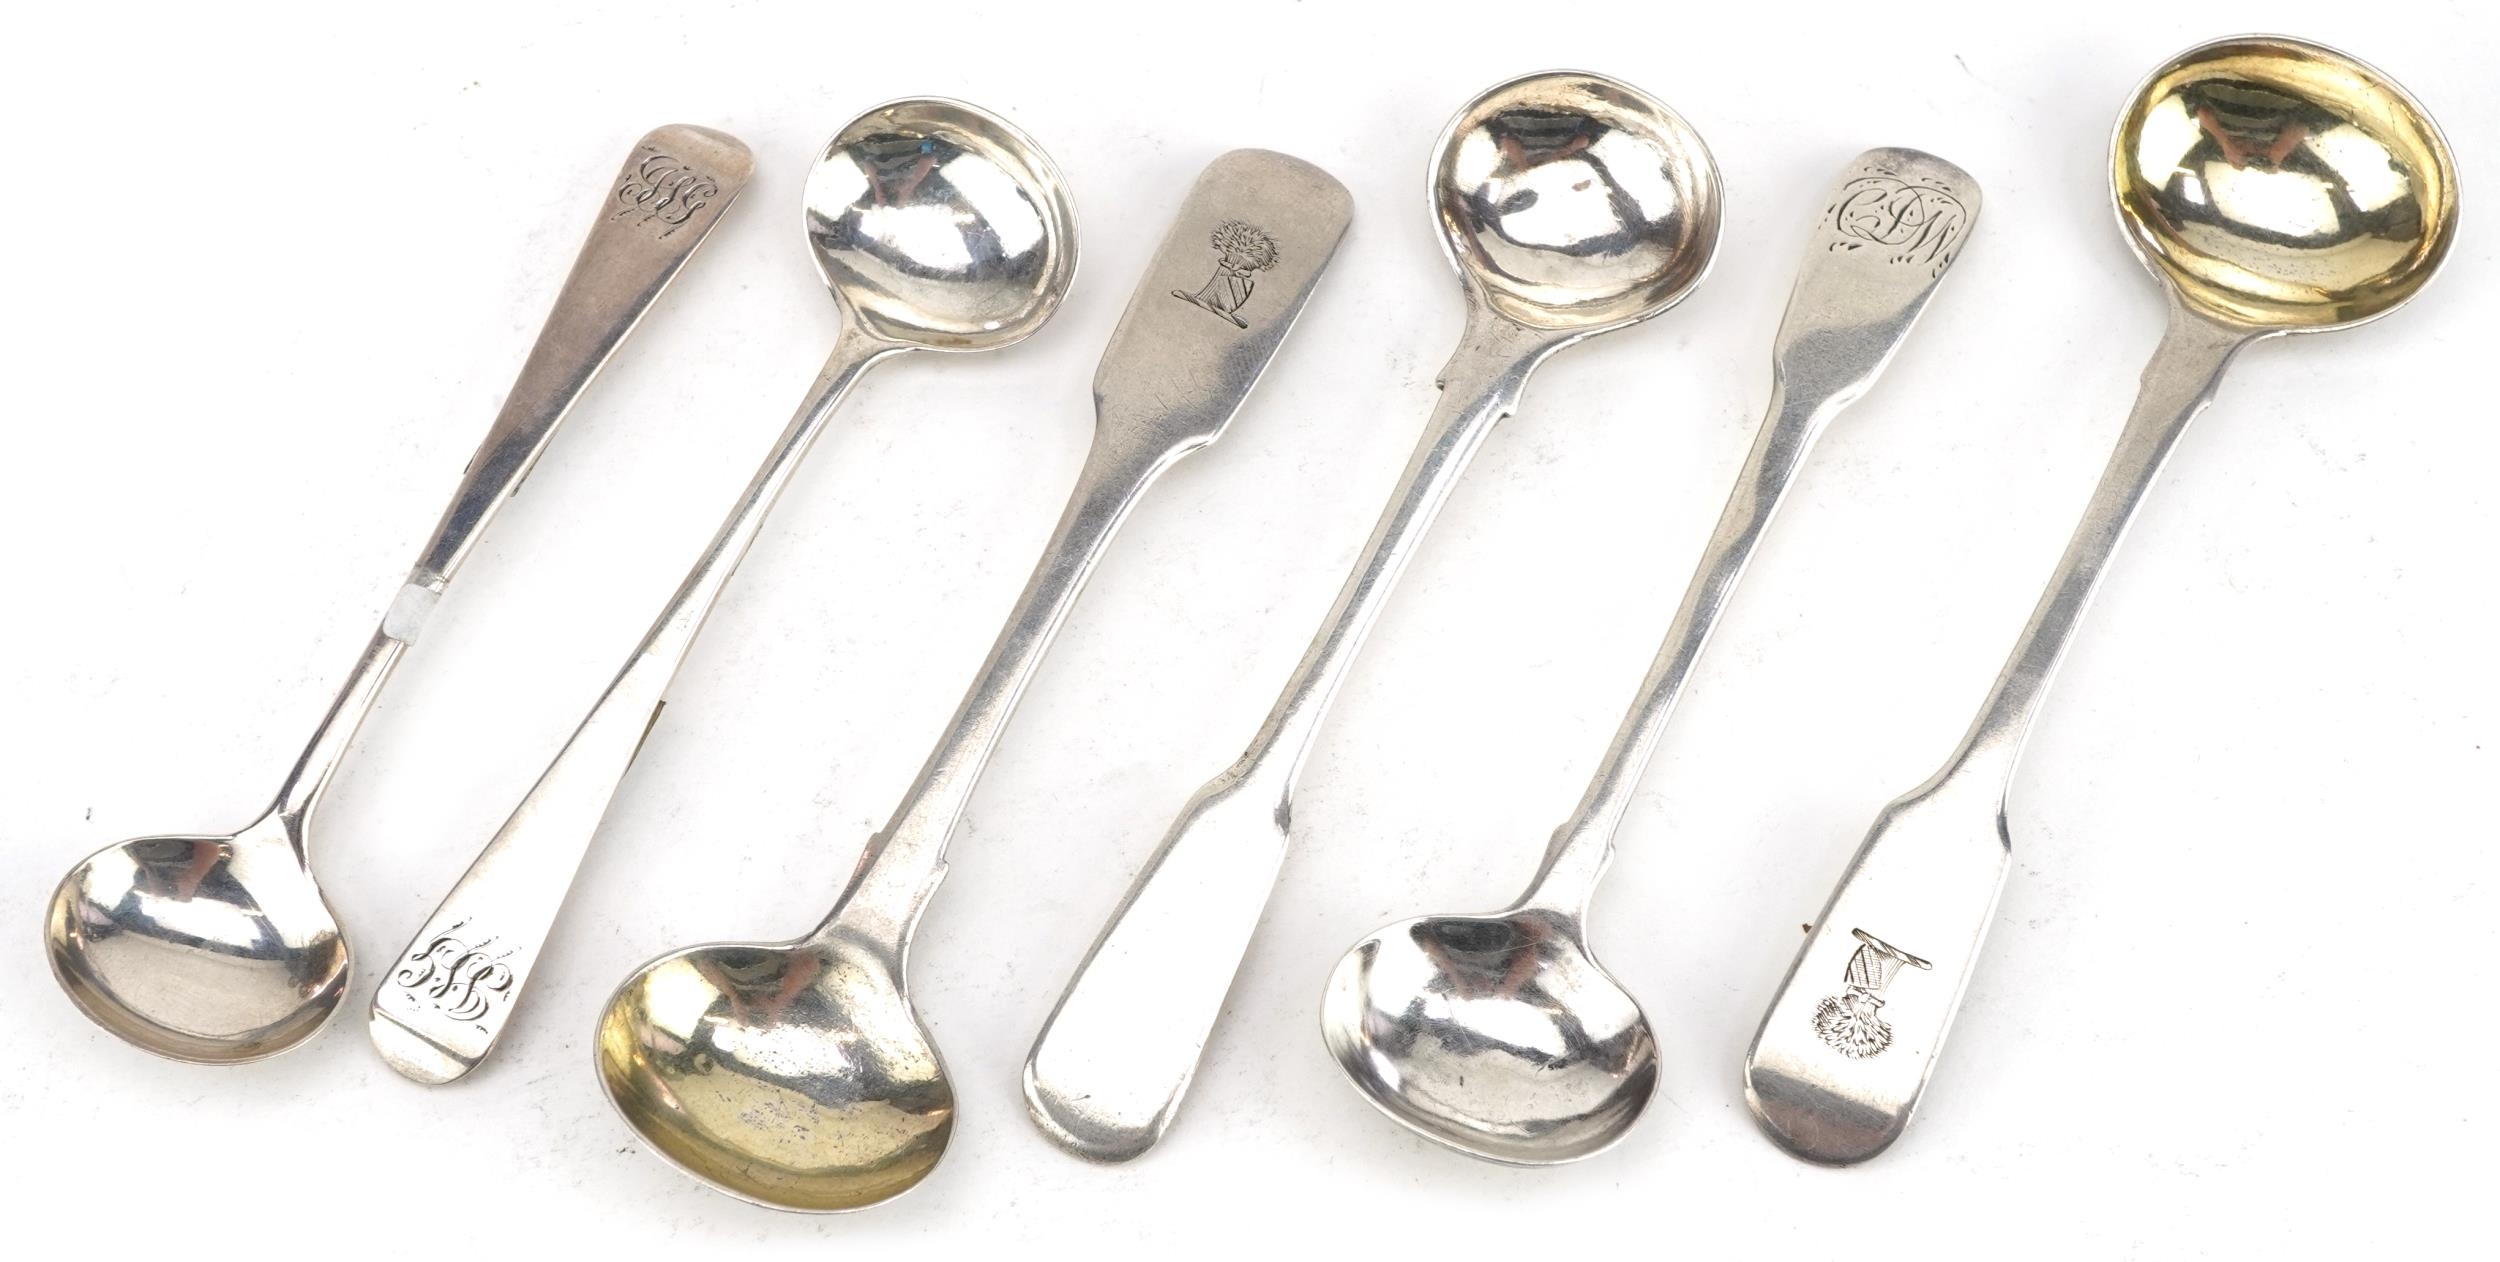 Six Georgian and later silver mustard spoons, the largest 10.5cm in length, total 57.4g : For